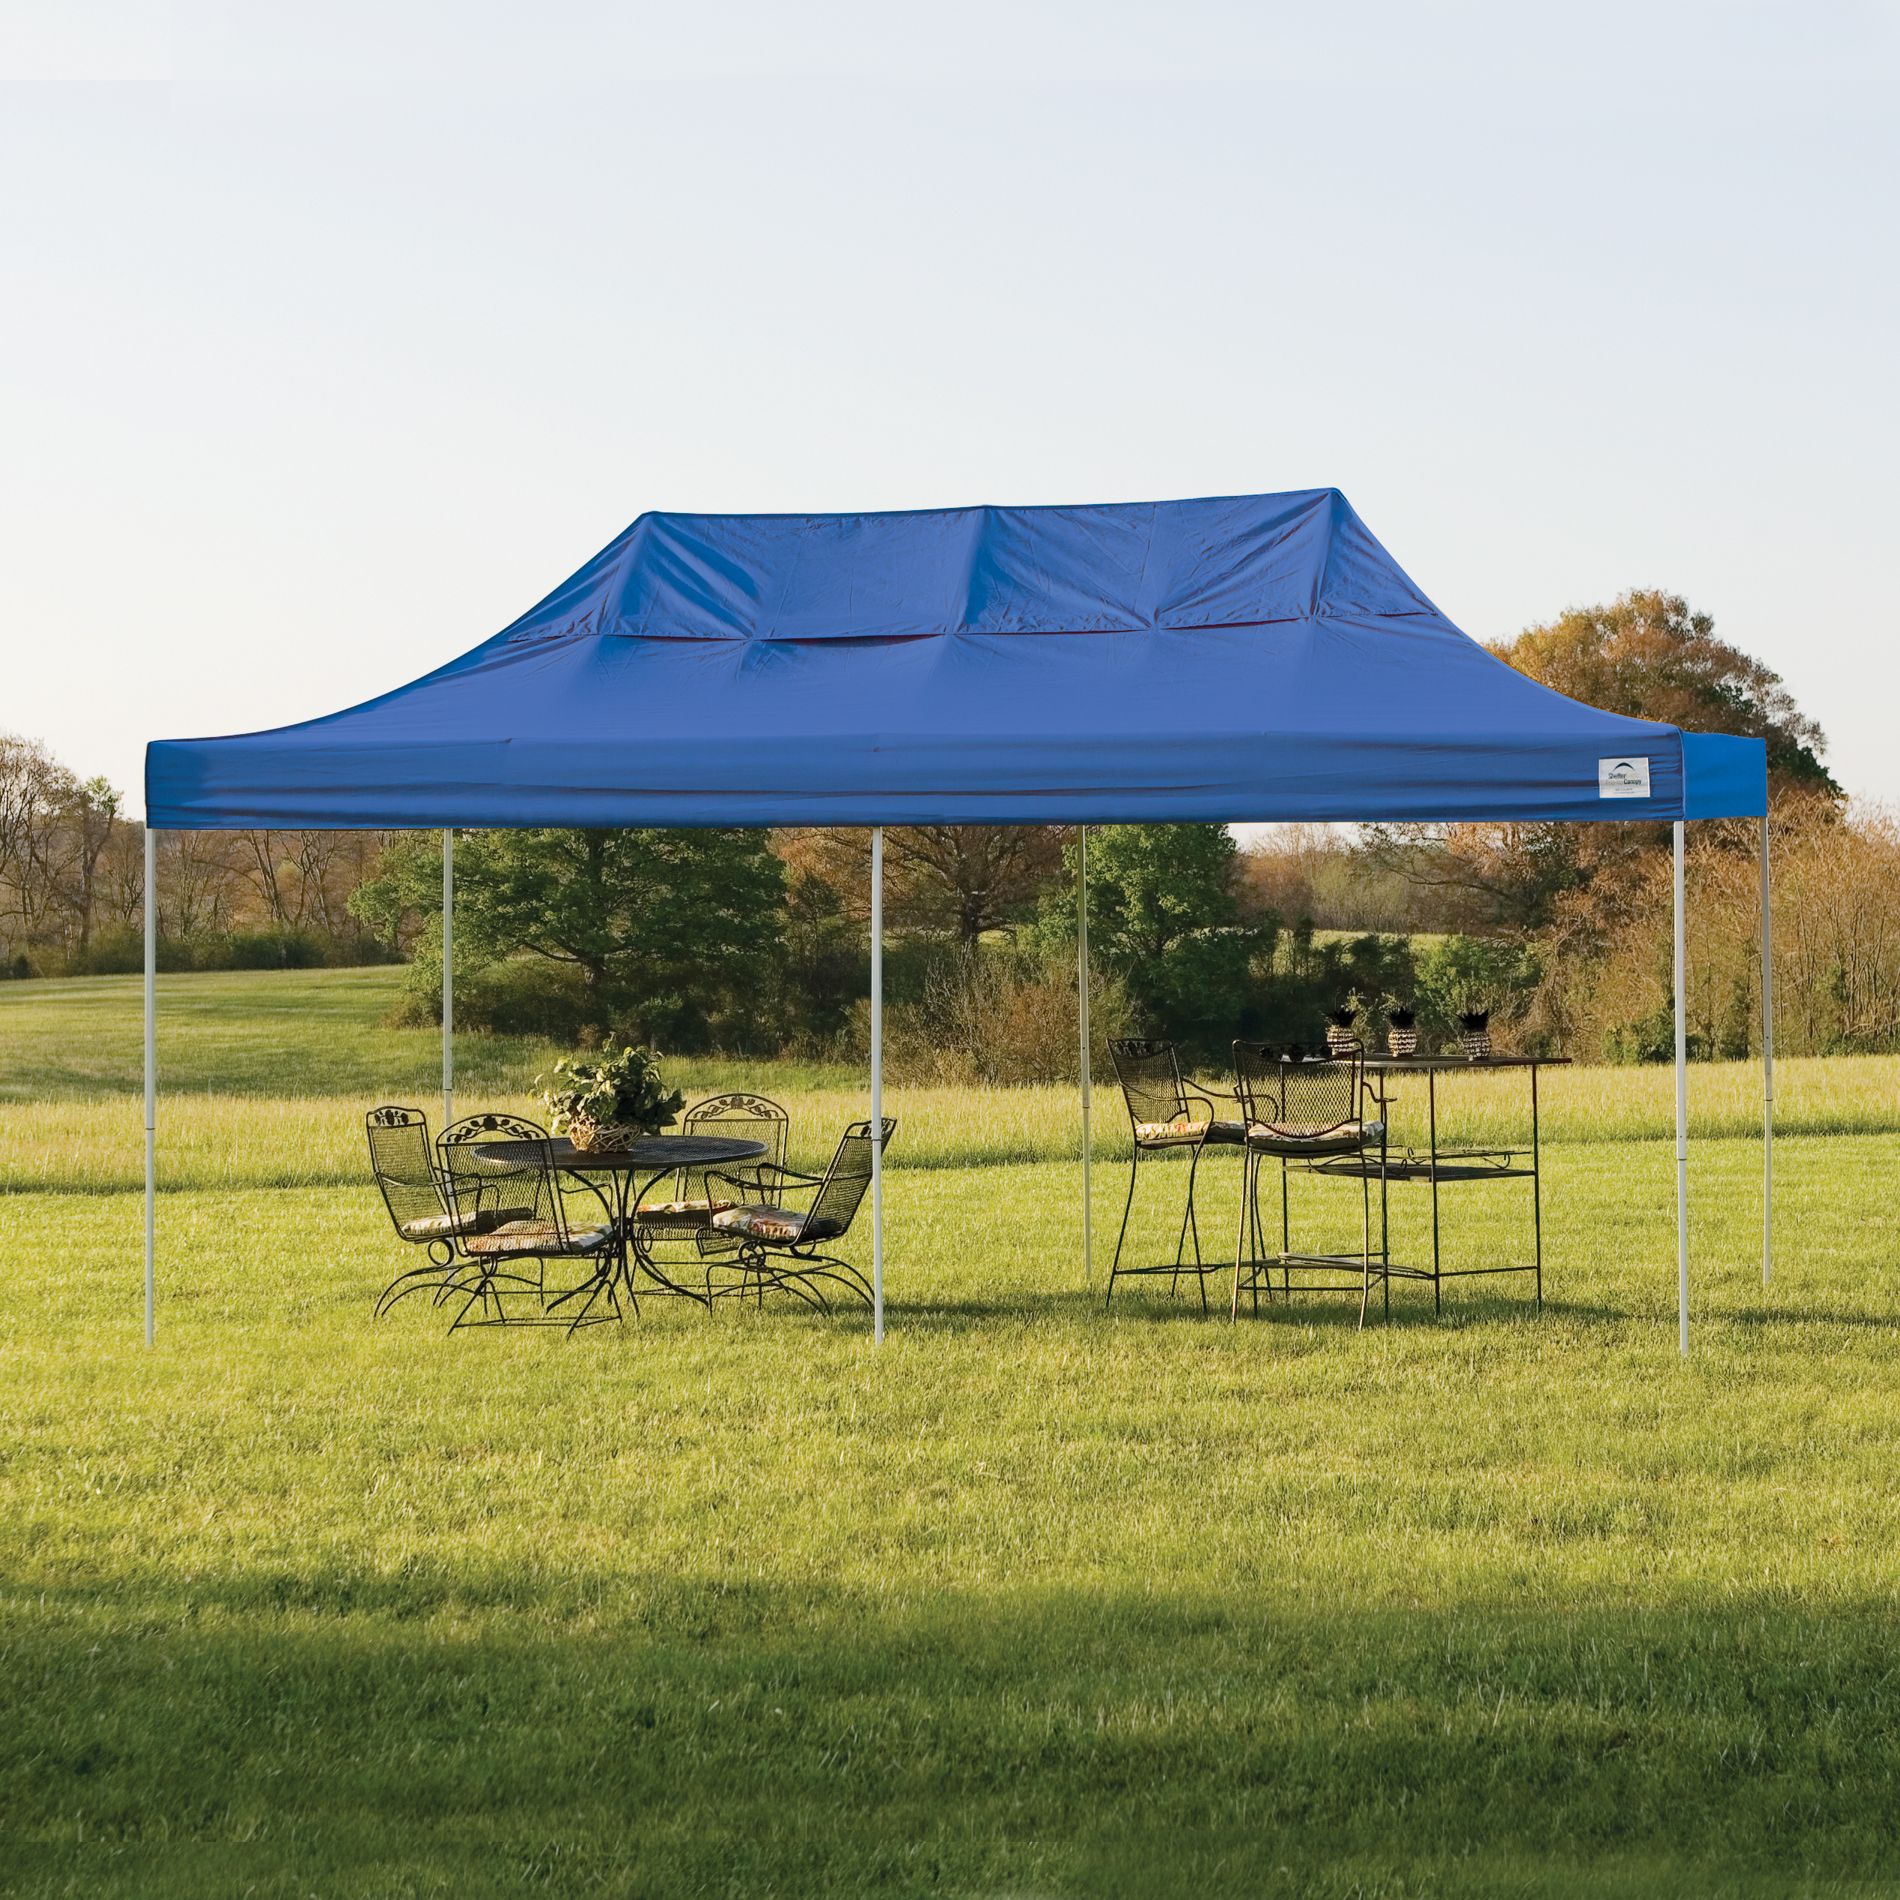 ShelterLogic Pop-Up 10' x 20' Truss Pro Canopy Tent with Blue Cover